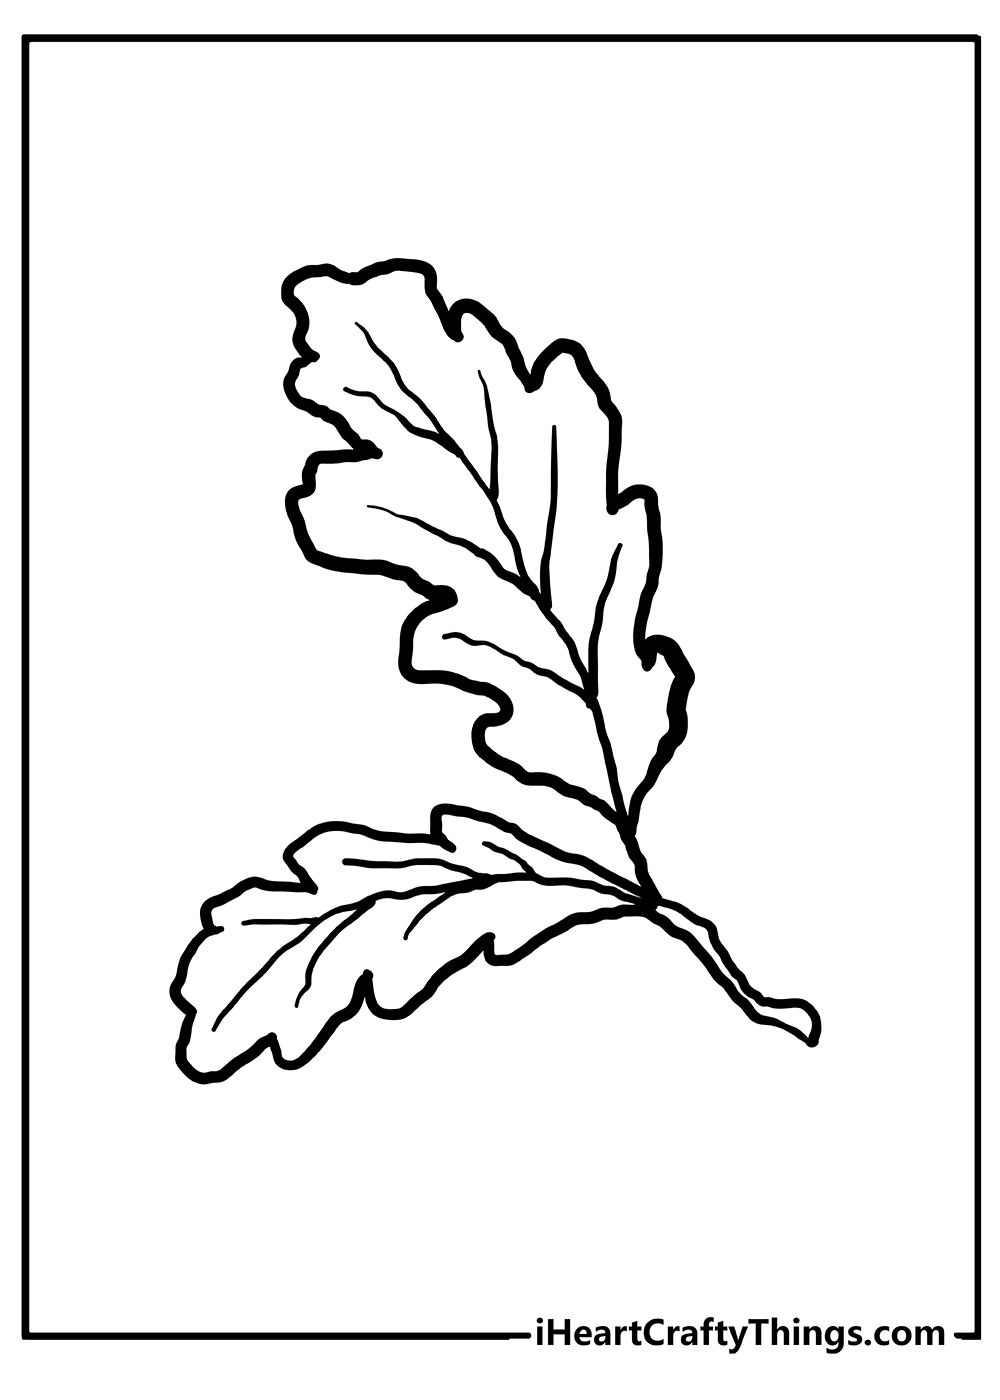 Fall Leaves Coloring Pages for preschoolers free printable